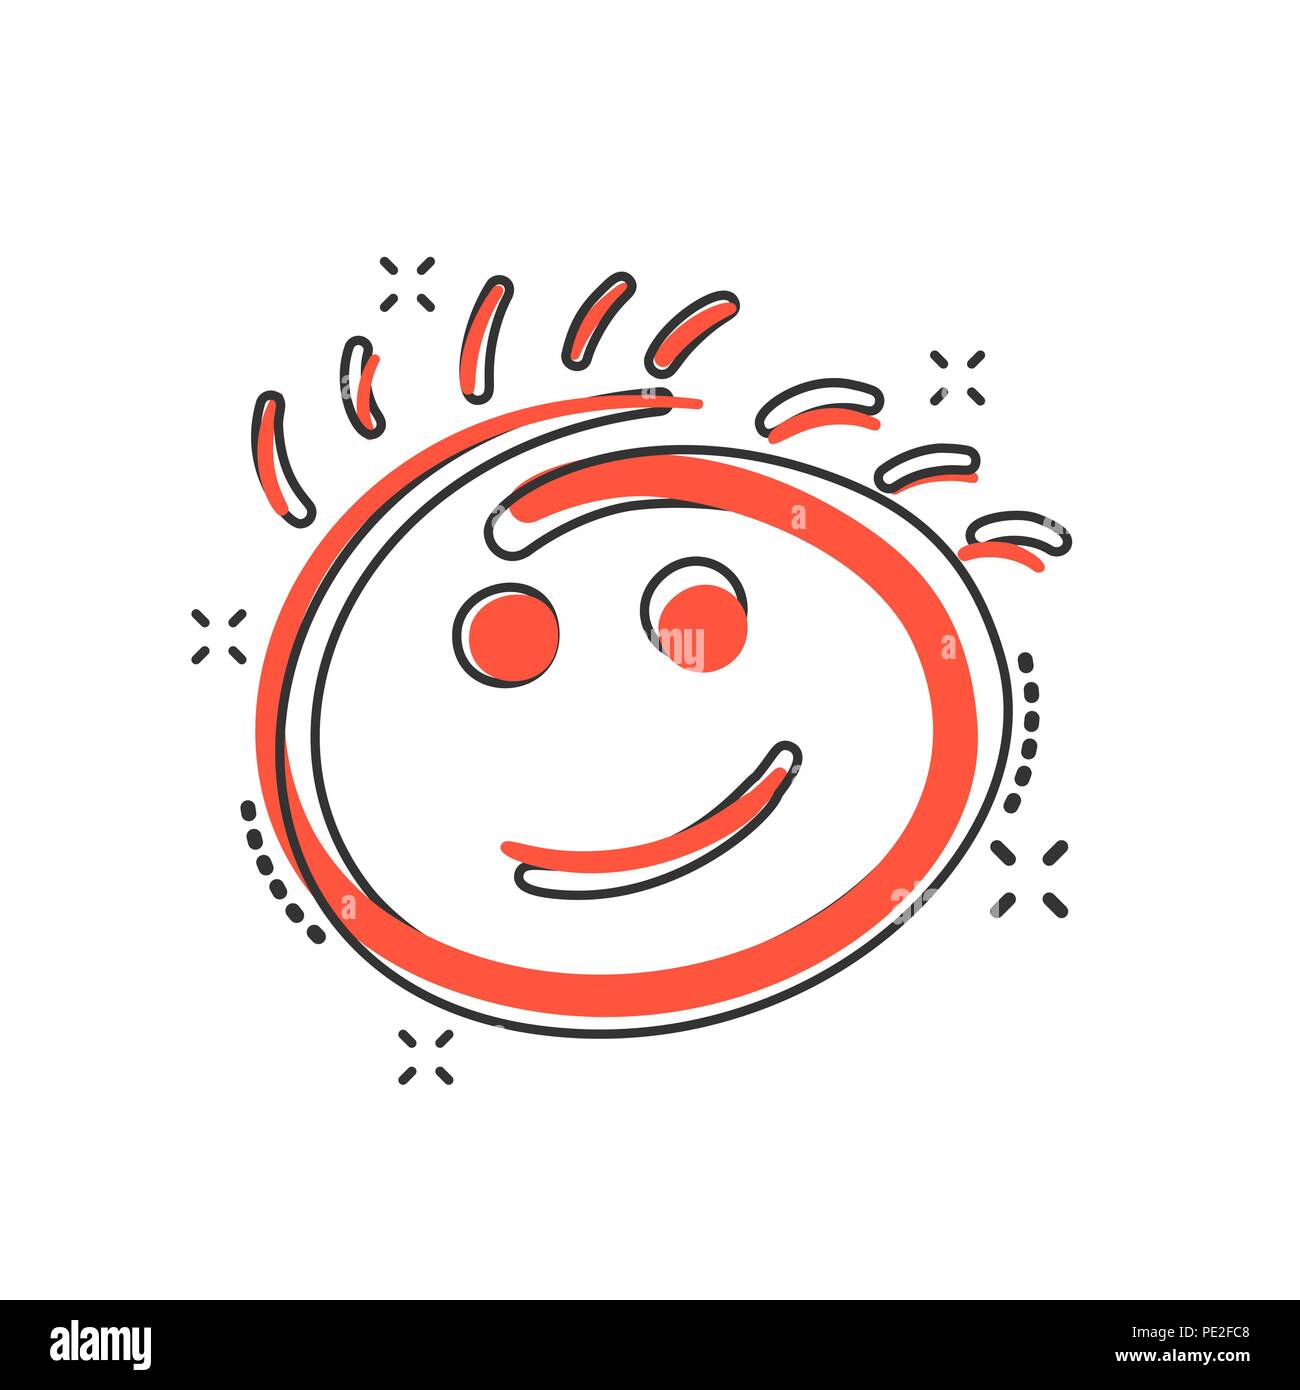 Vector cartoon simple smile icon in comic style. Hand drawn face doodle sign illustration pictogram. Smile business splash effect concept. Stock Vector